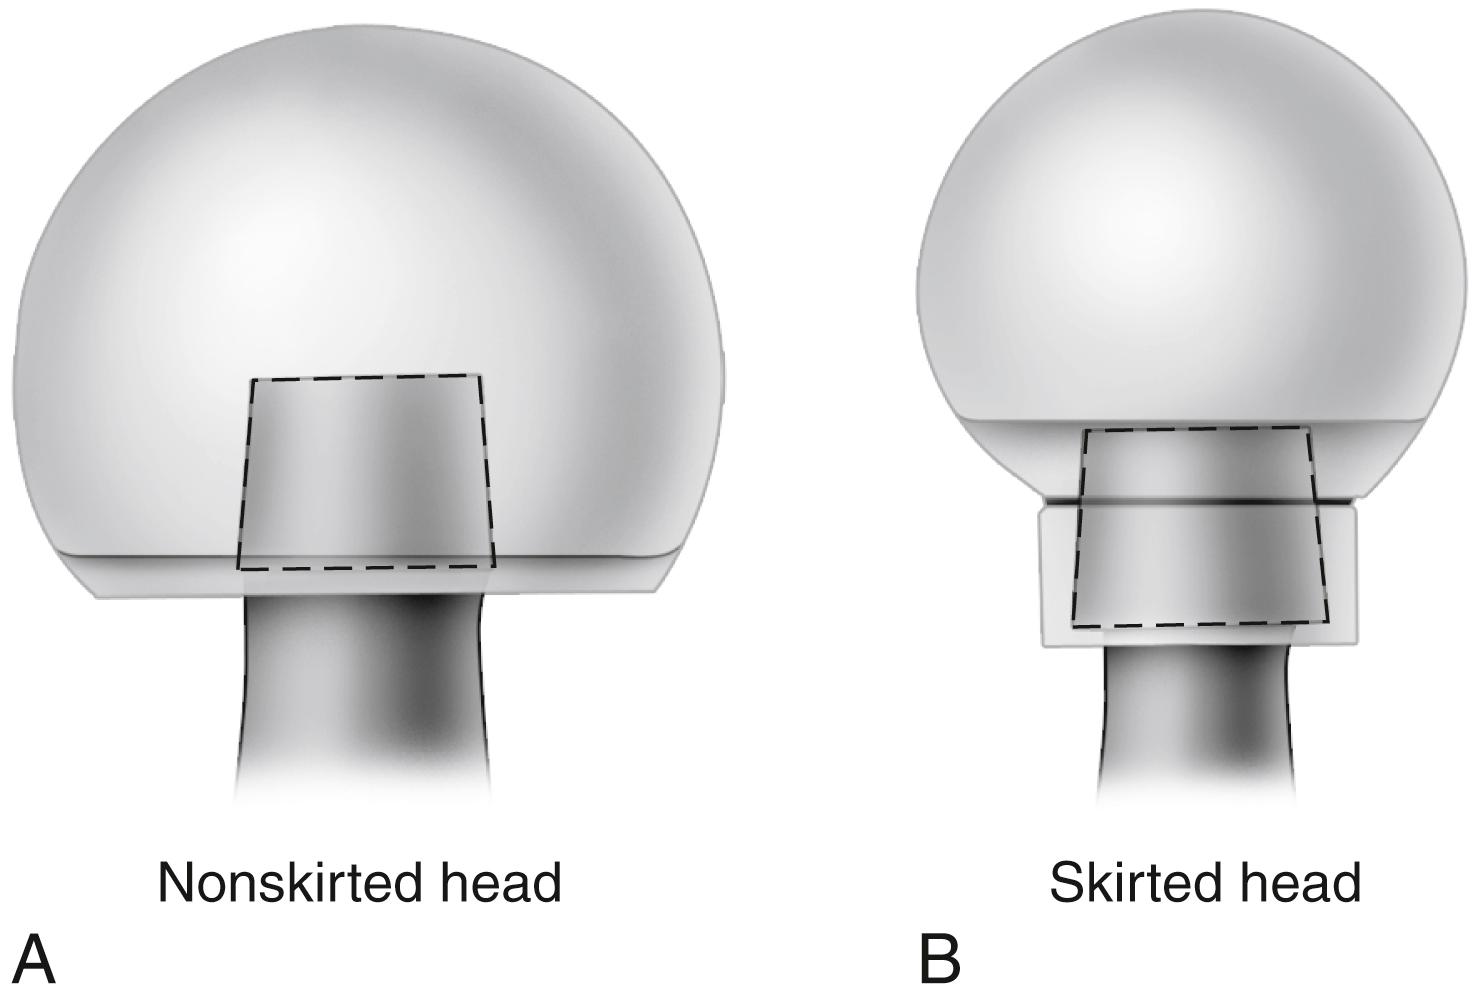 FIGURE 3.8, Head-to-neck ratio of implants. Large-diameter head with trapezoidal neck (A) has greater range of motion and less impingement than smaller diameter head and skirted modular neck (B) .